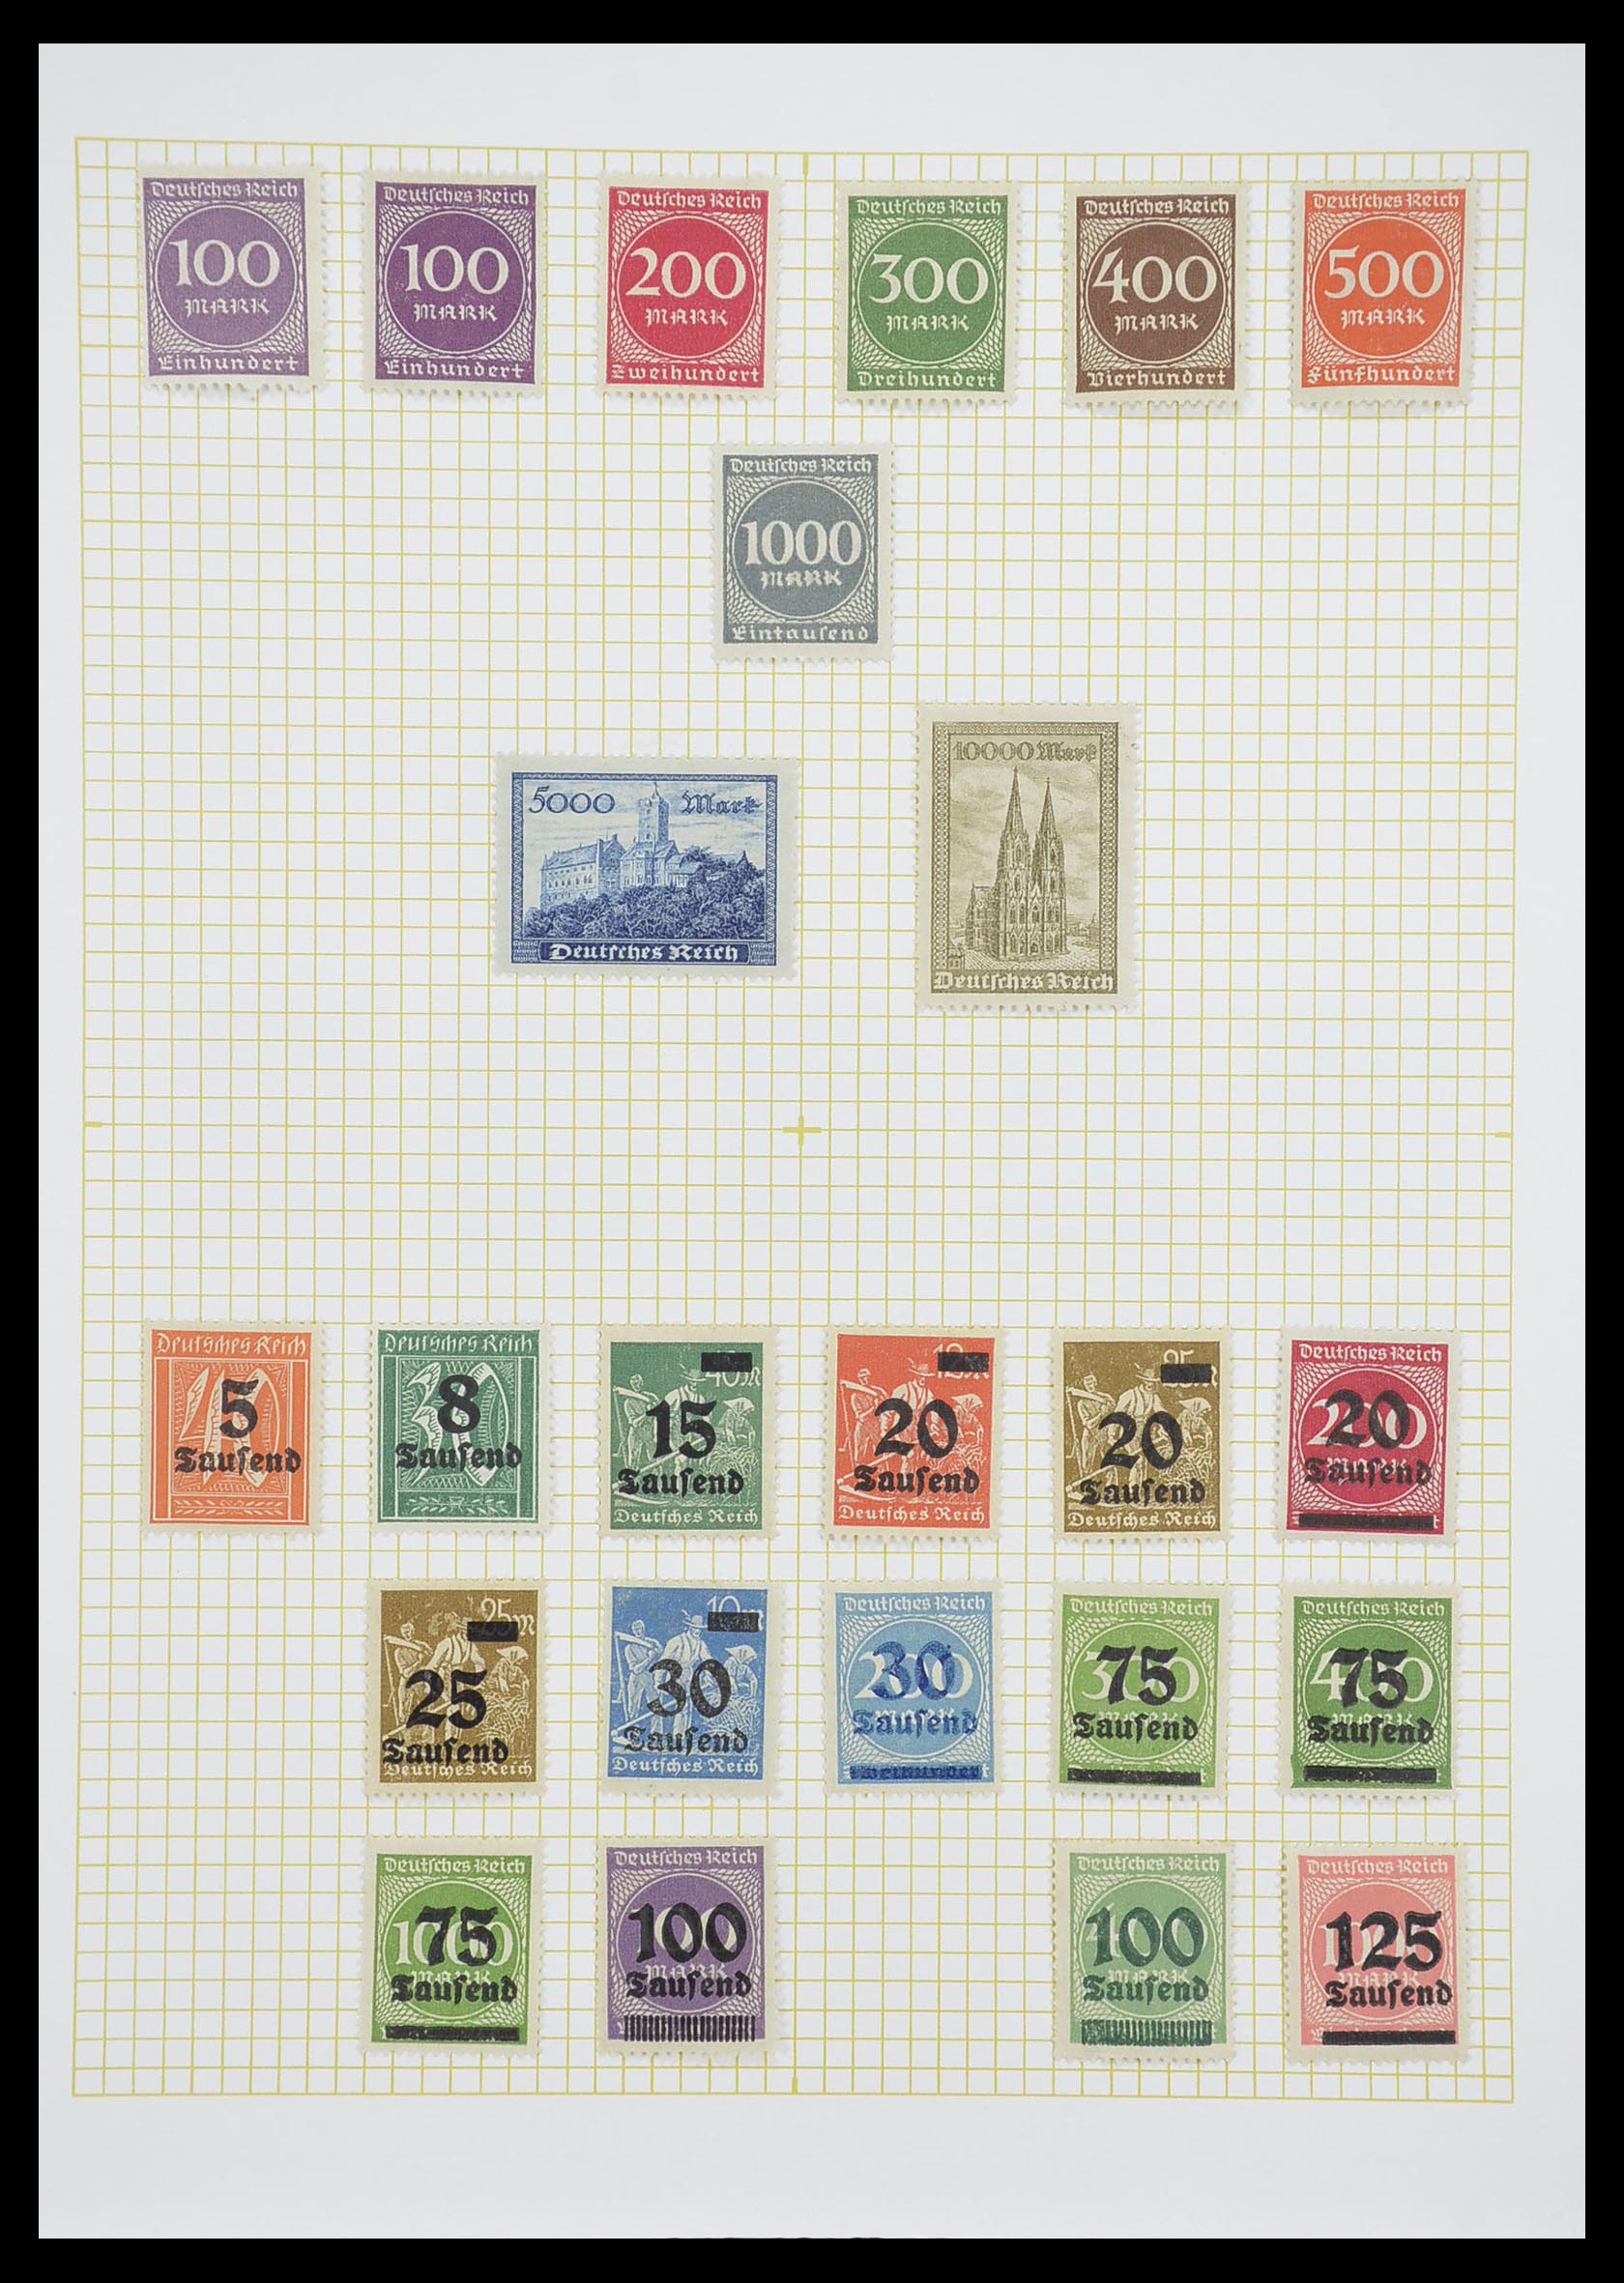 33451 022 - Stamp collection 33451 European countries 1850-1990.